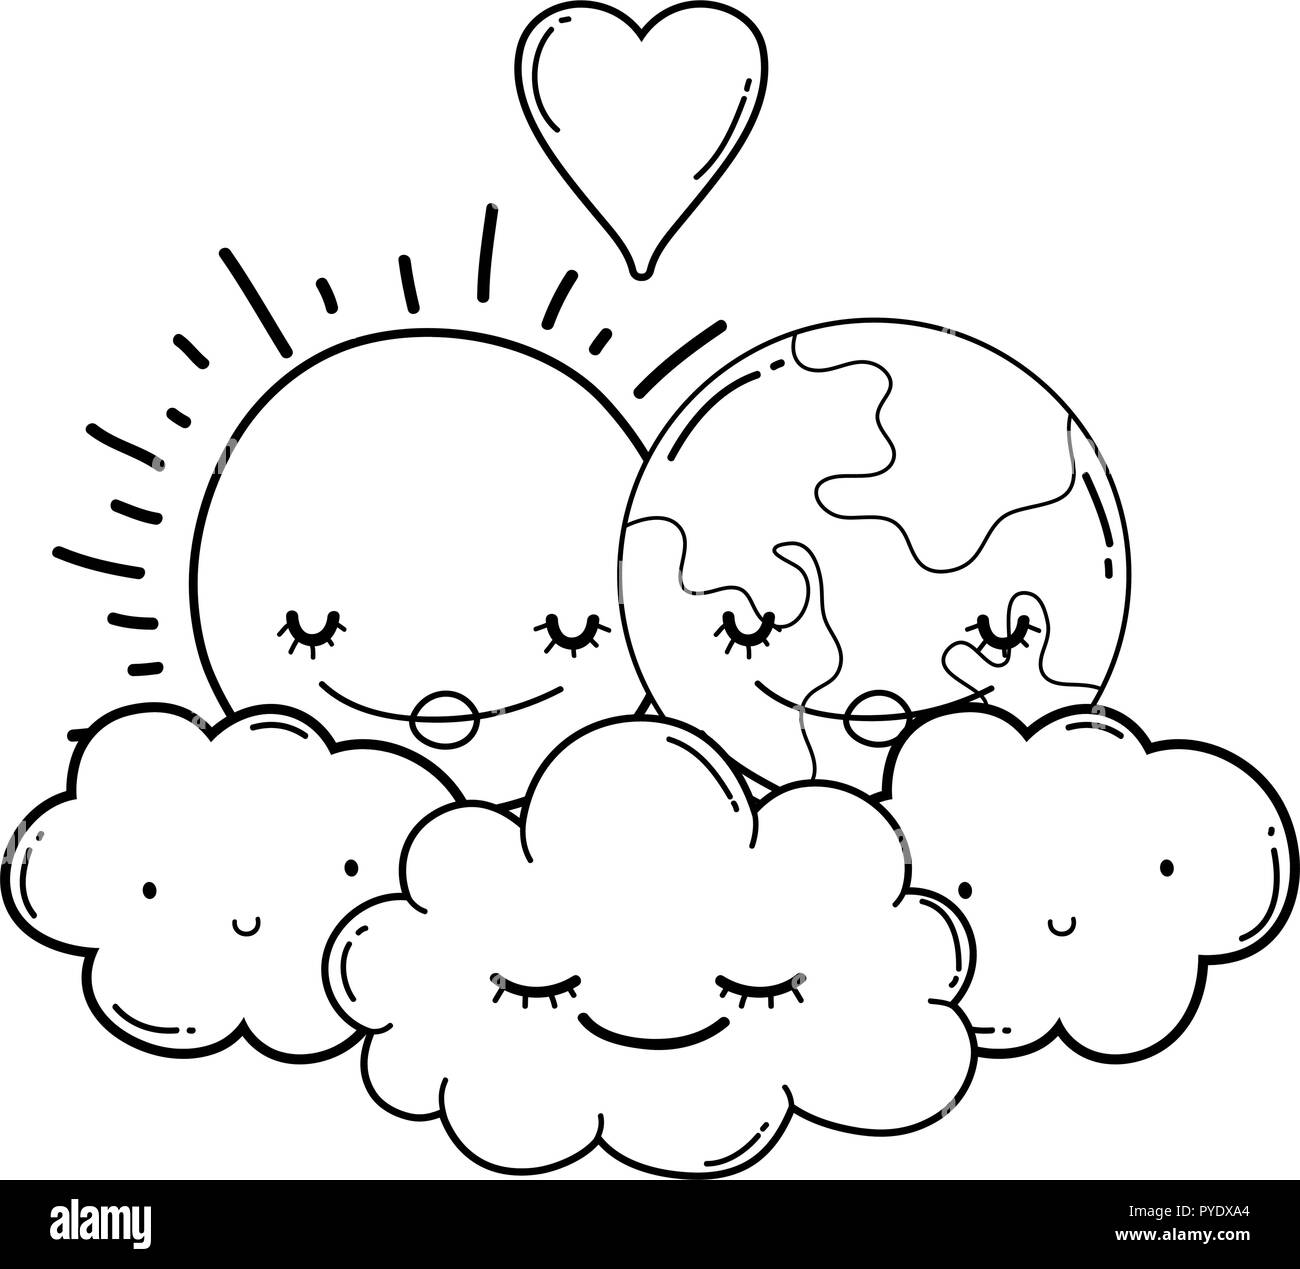 Moon and sun cartoons in black and white Stock Vector